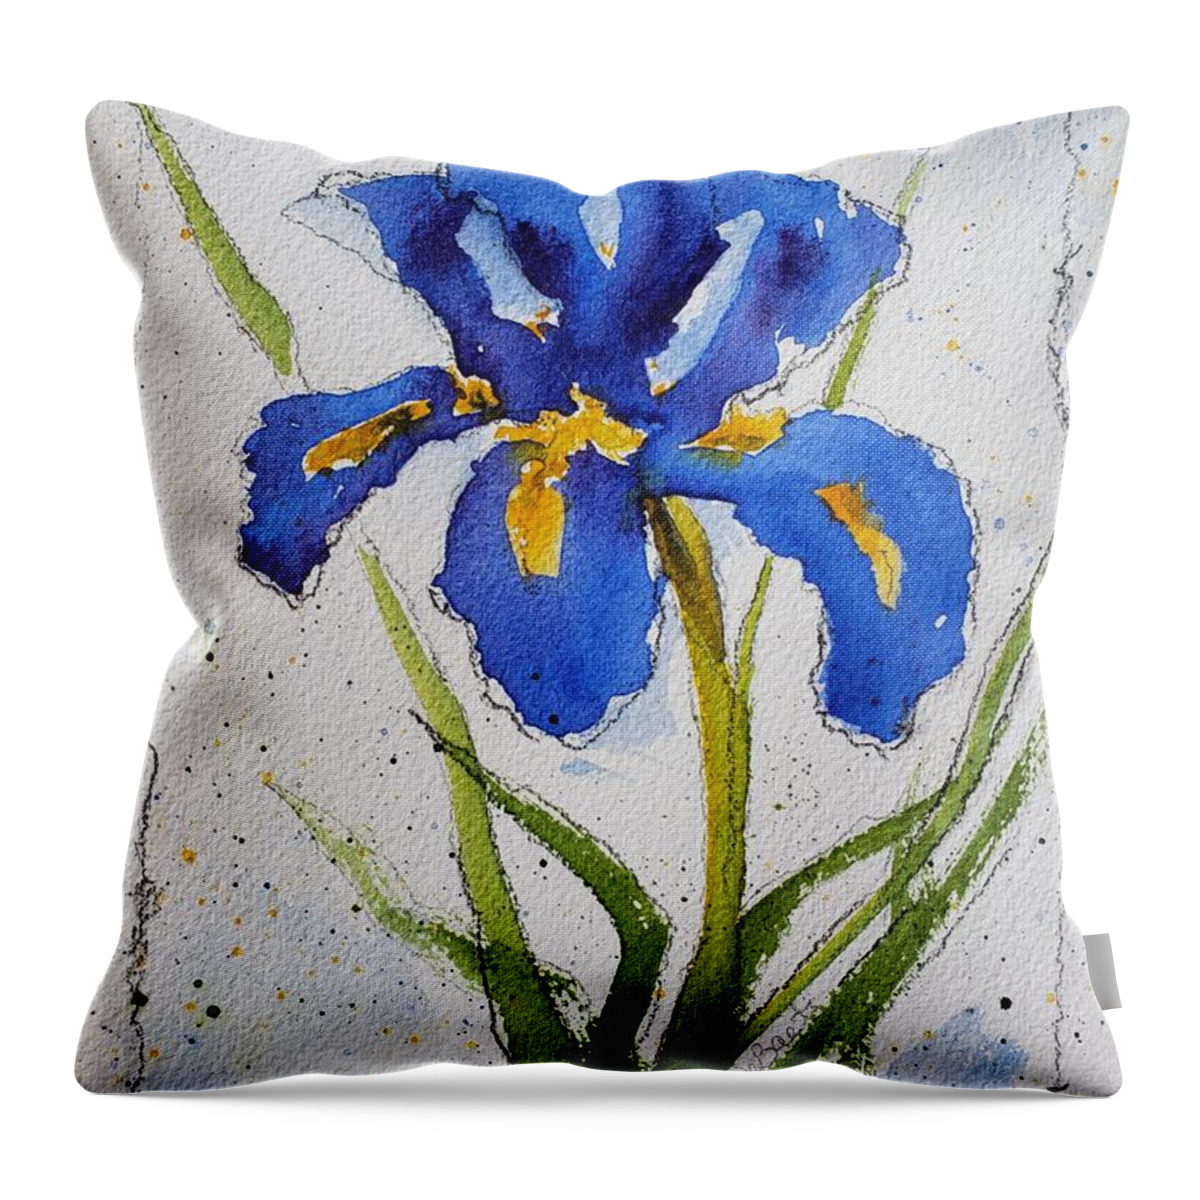 Floral Throw Pillow featuring the painting Iris Blue by Lisa Debaets